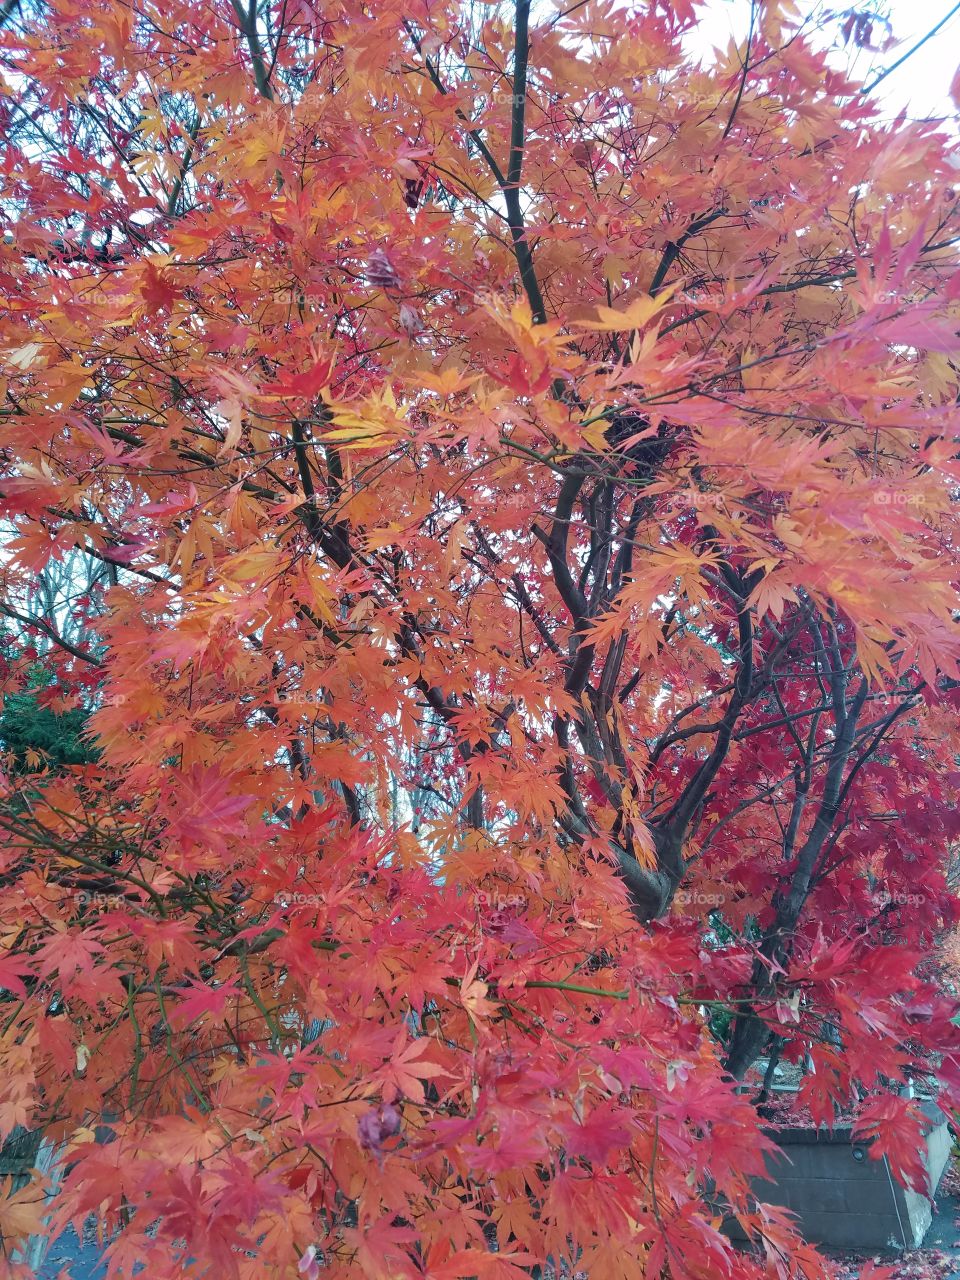 Red and orange leaves